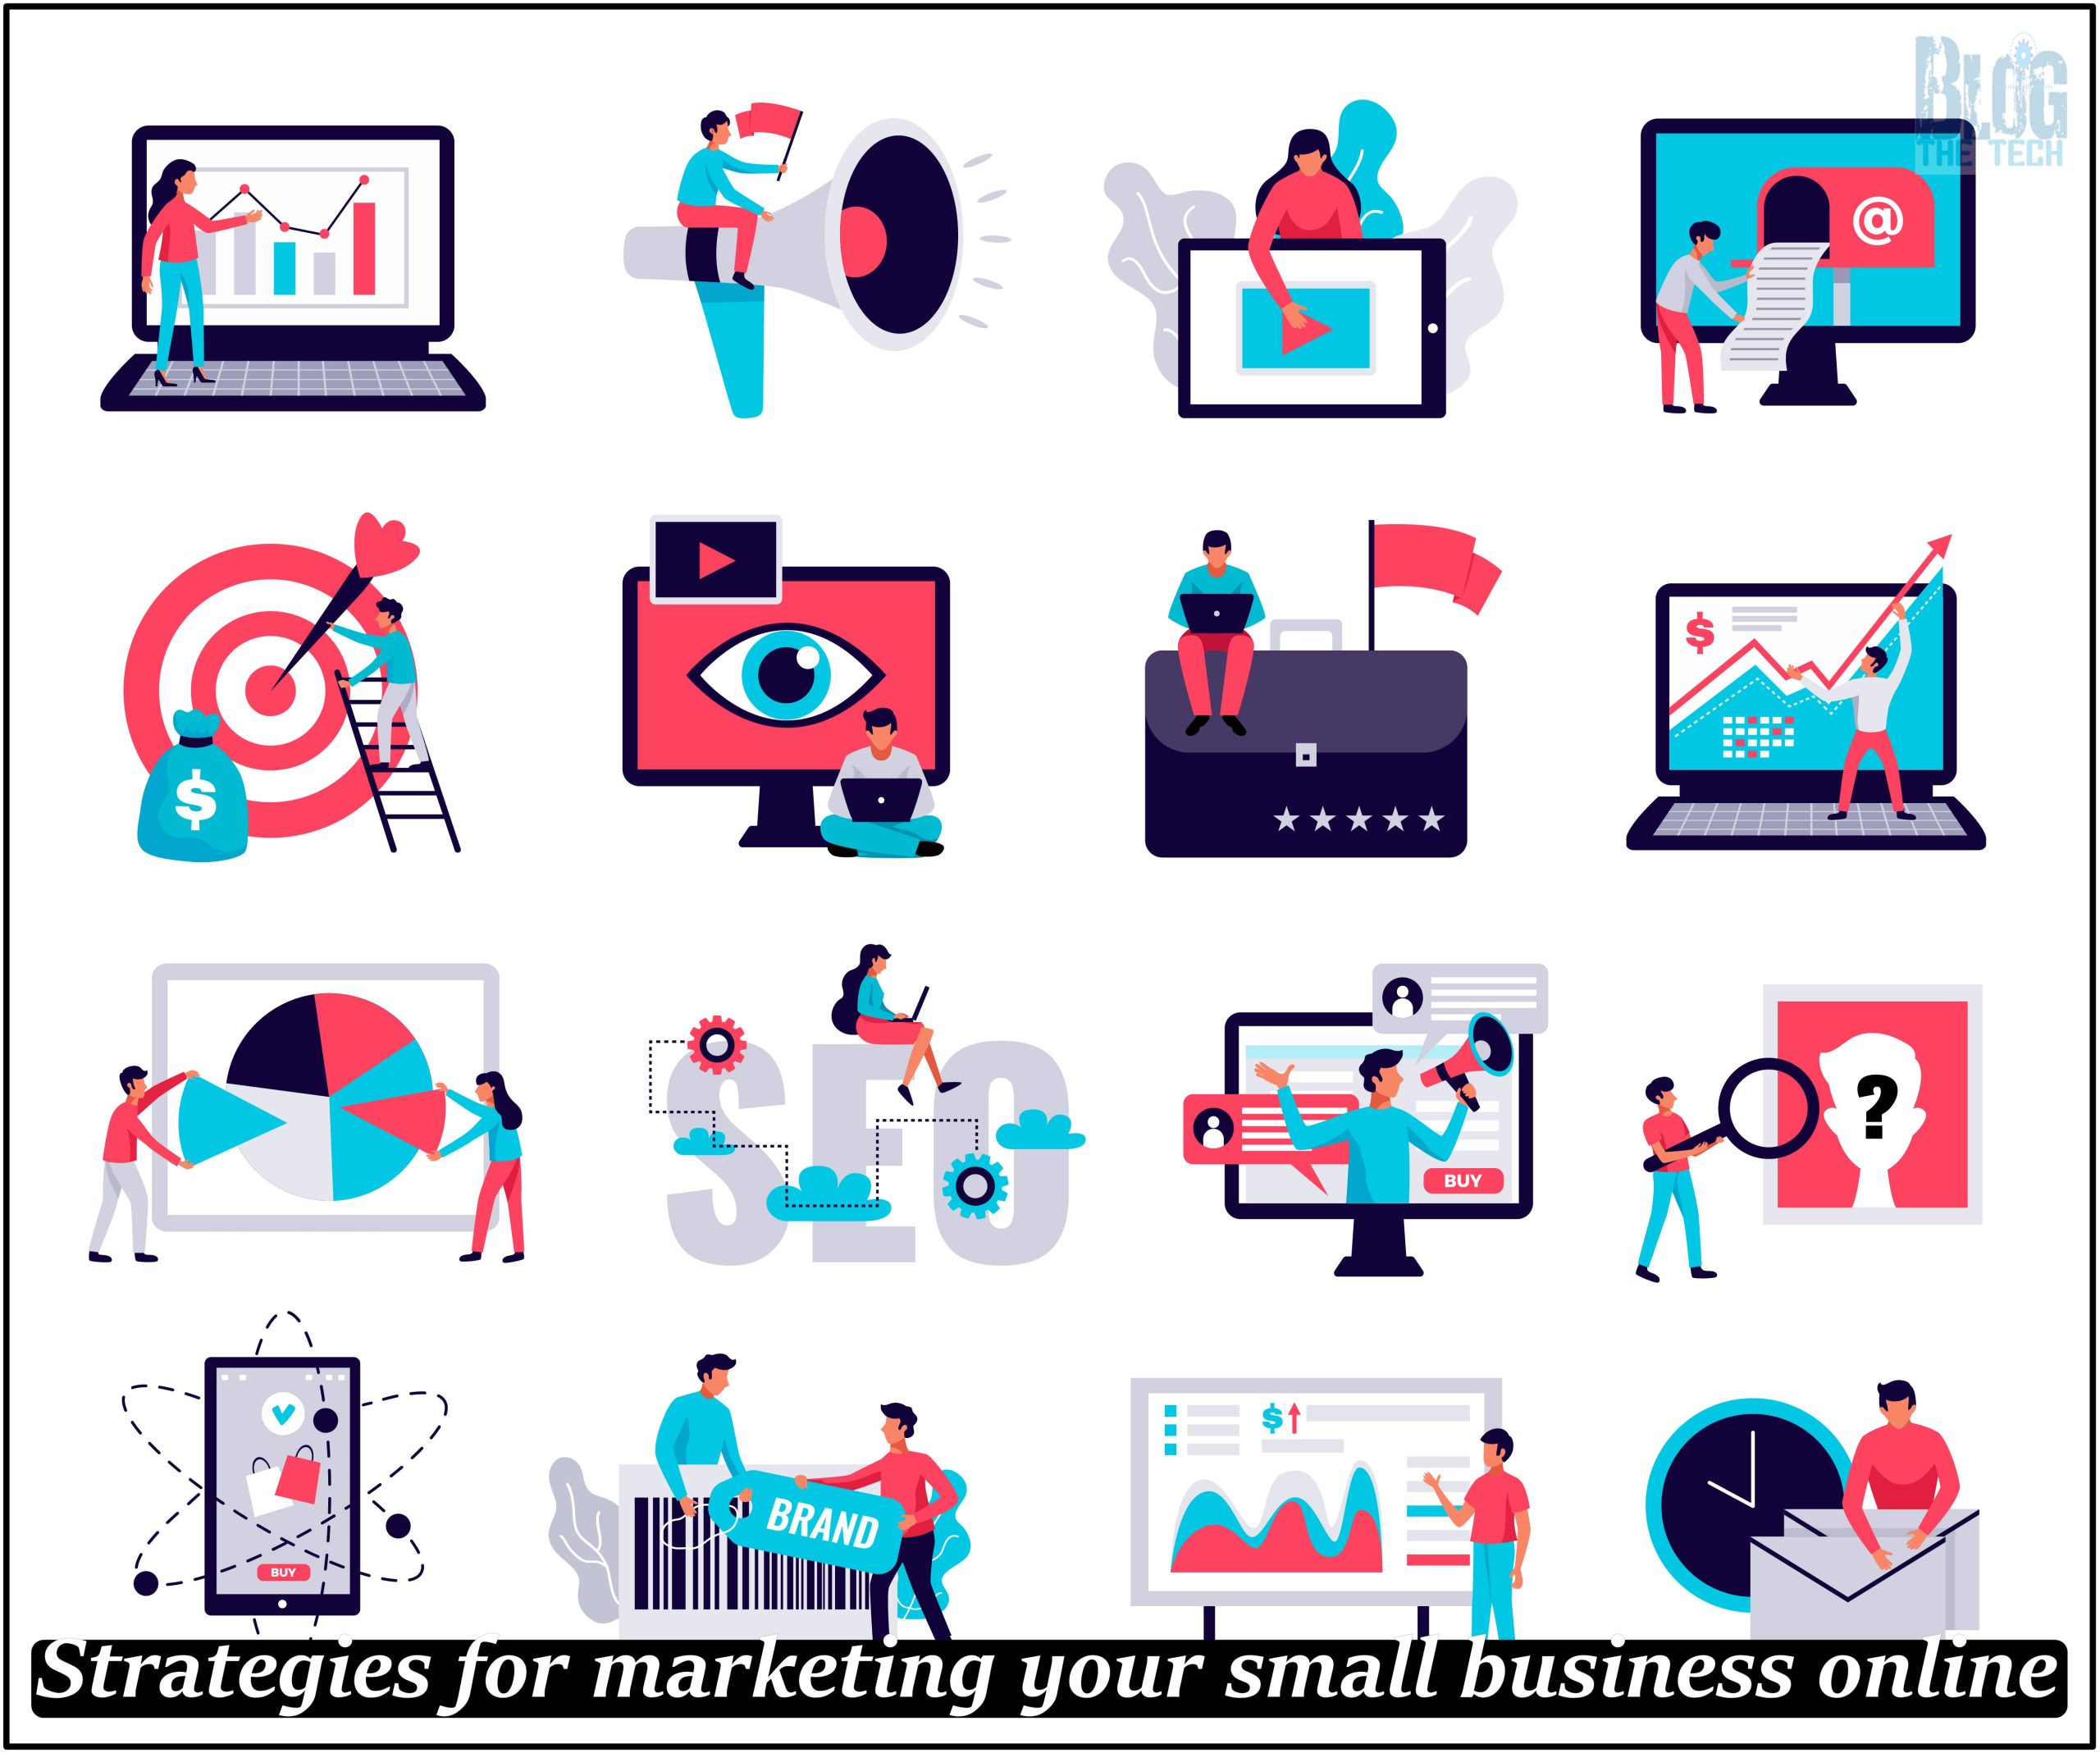 Strategies for marketing your small business online